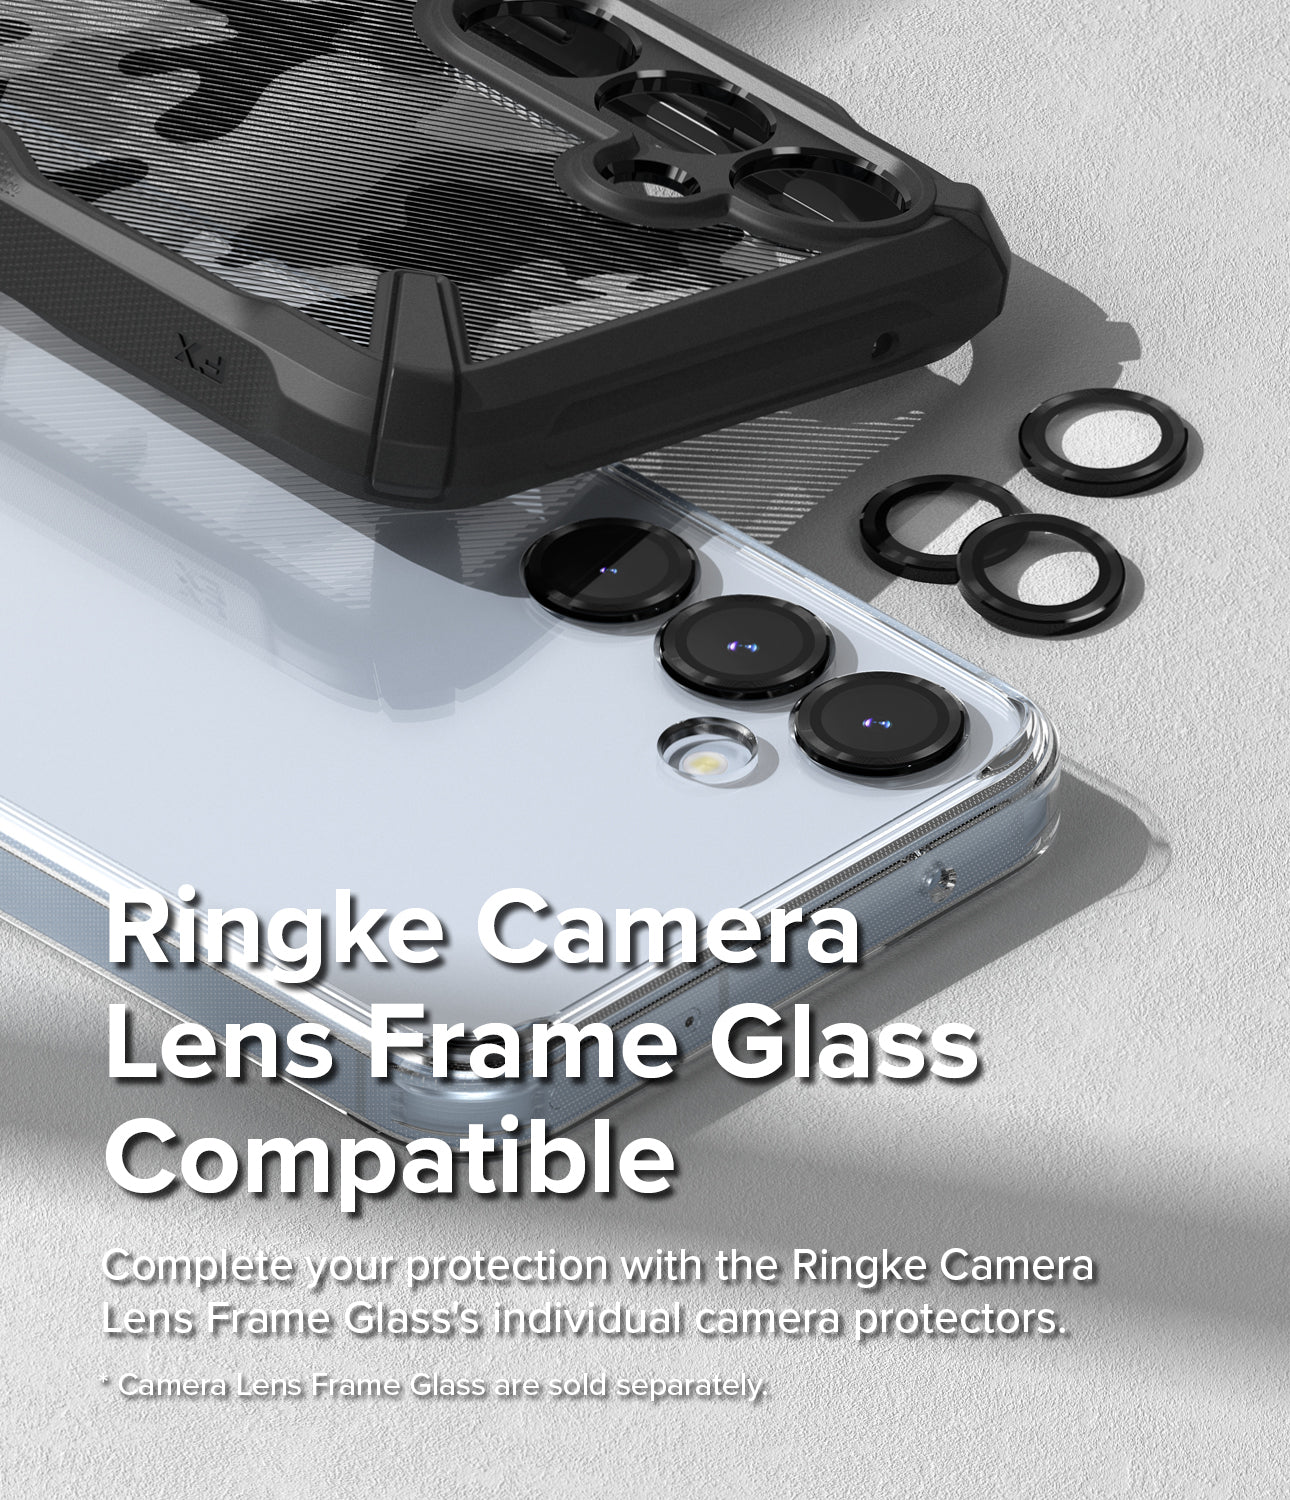 Galaxy A35 Case | Fusion - Ringke Camera Lens Frame Glass Compatible. Complete your protection with the Ringke Camera Lens Frame Glass' individual camera protectors.